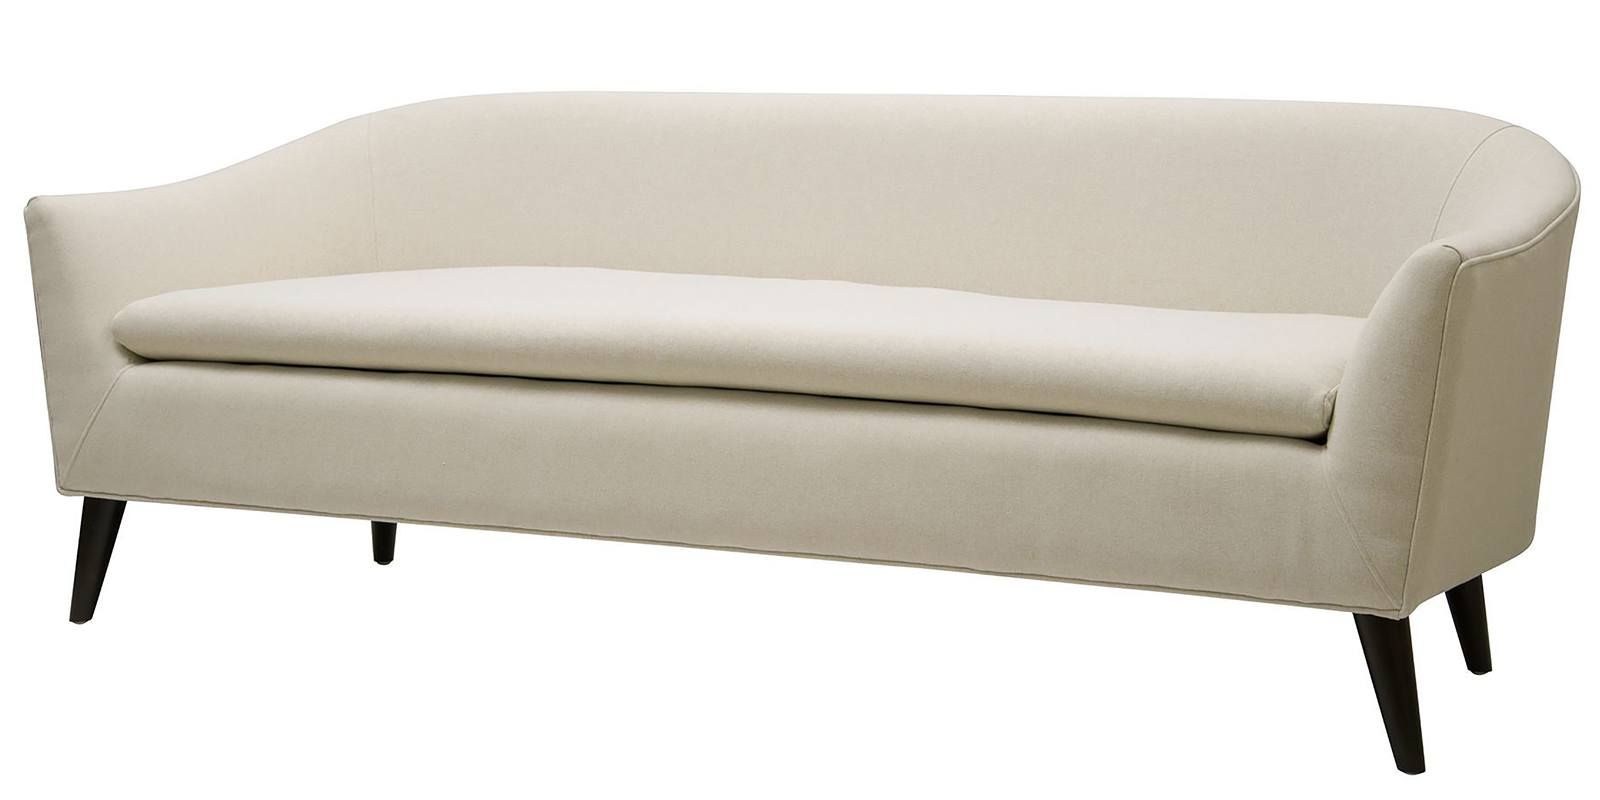 Classiest Mid Century Three Seater Sofa In White Colour – Dreamzz Pertaining To Mid Century 3 Seat Couches (View 4 of 20)